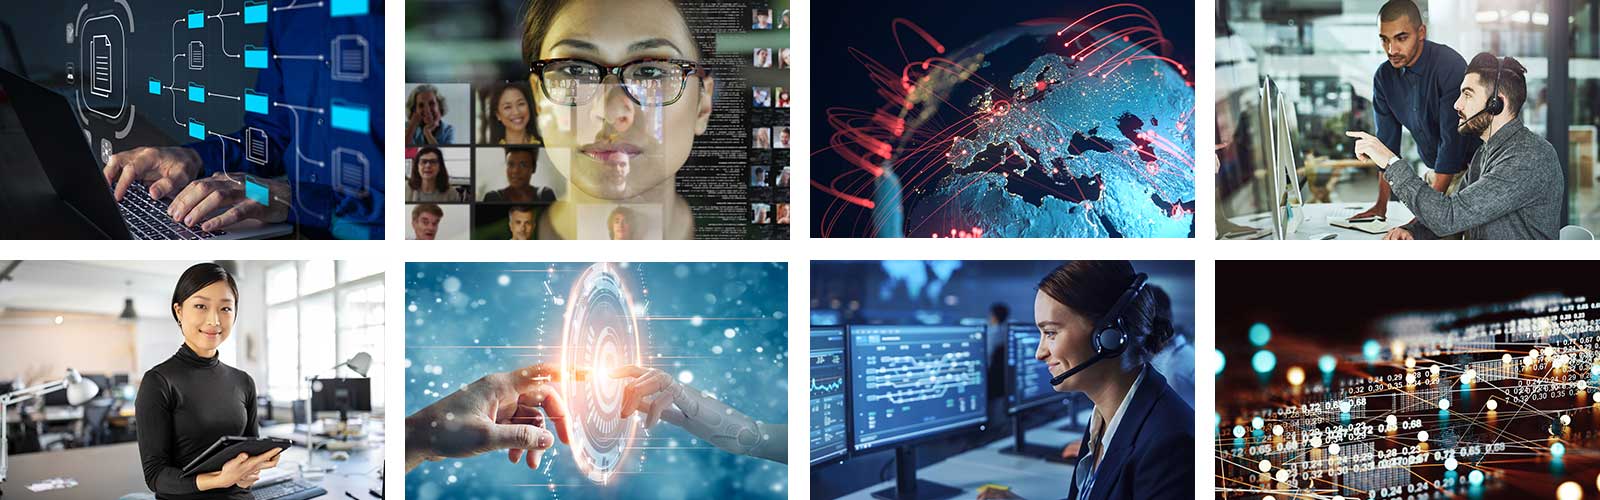 A selection of images of depicting careers and work with information systems.